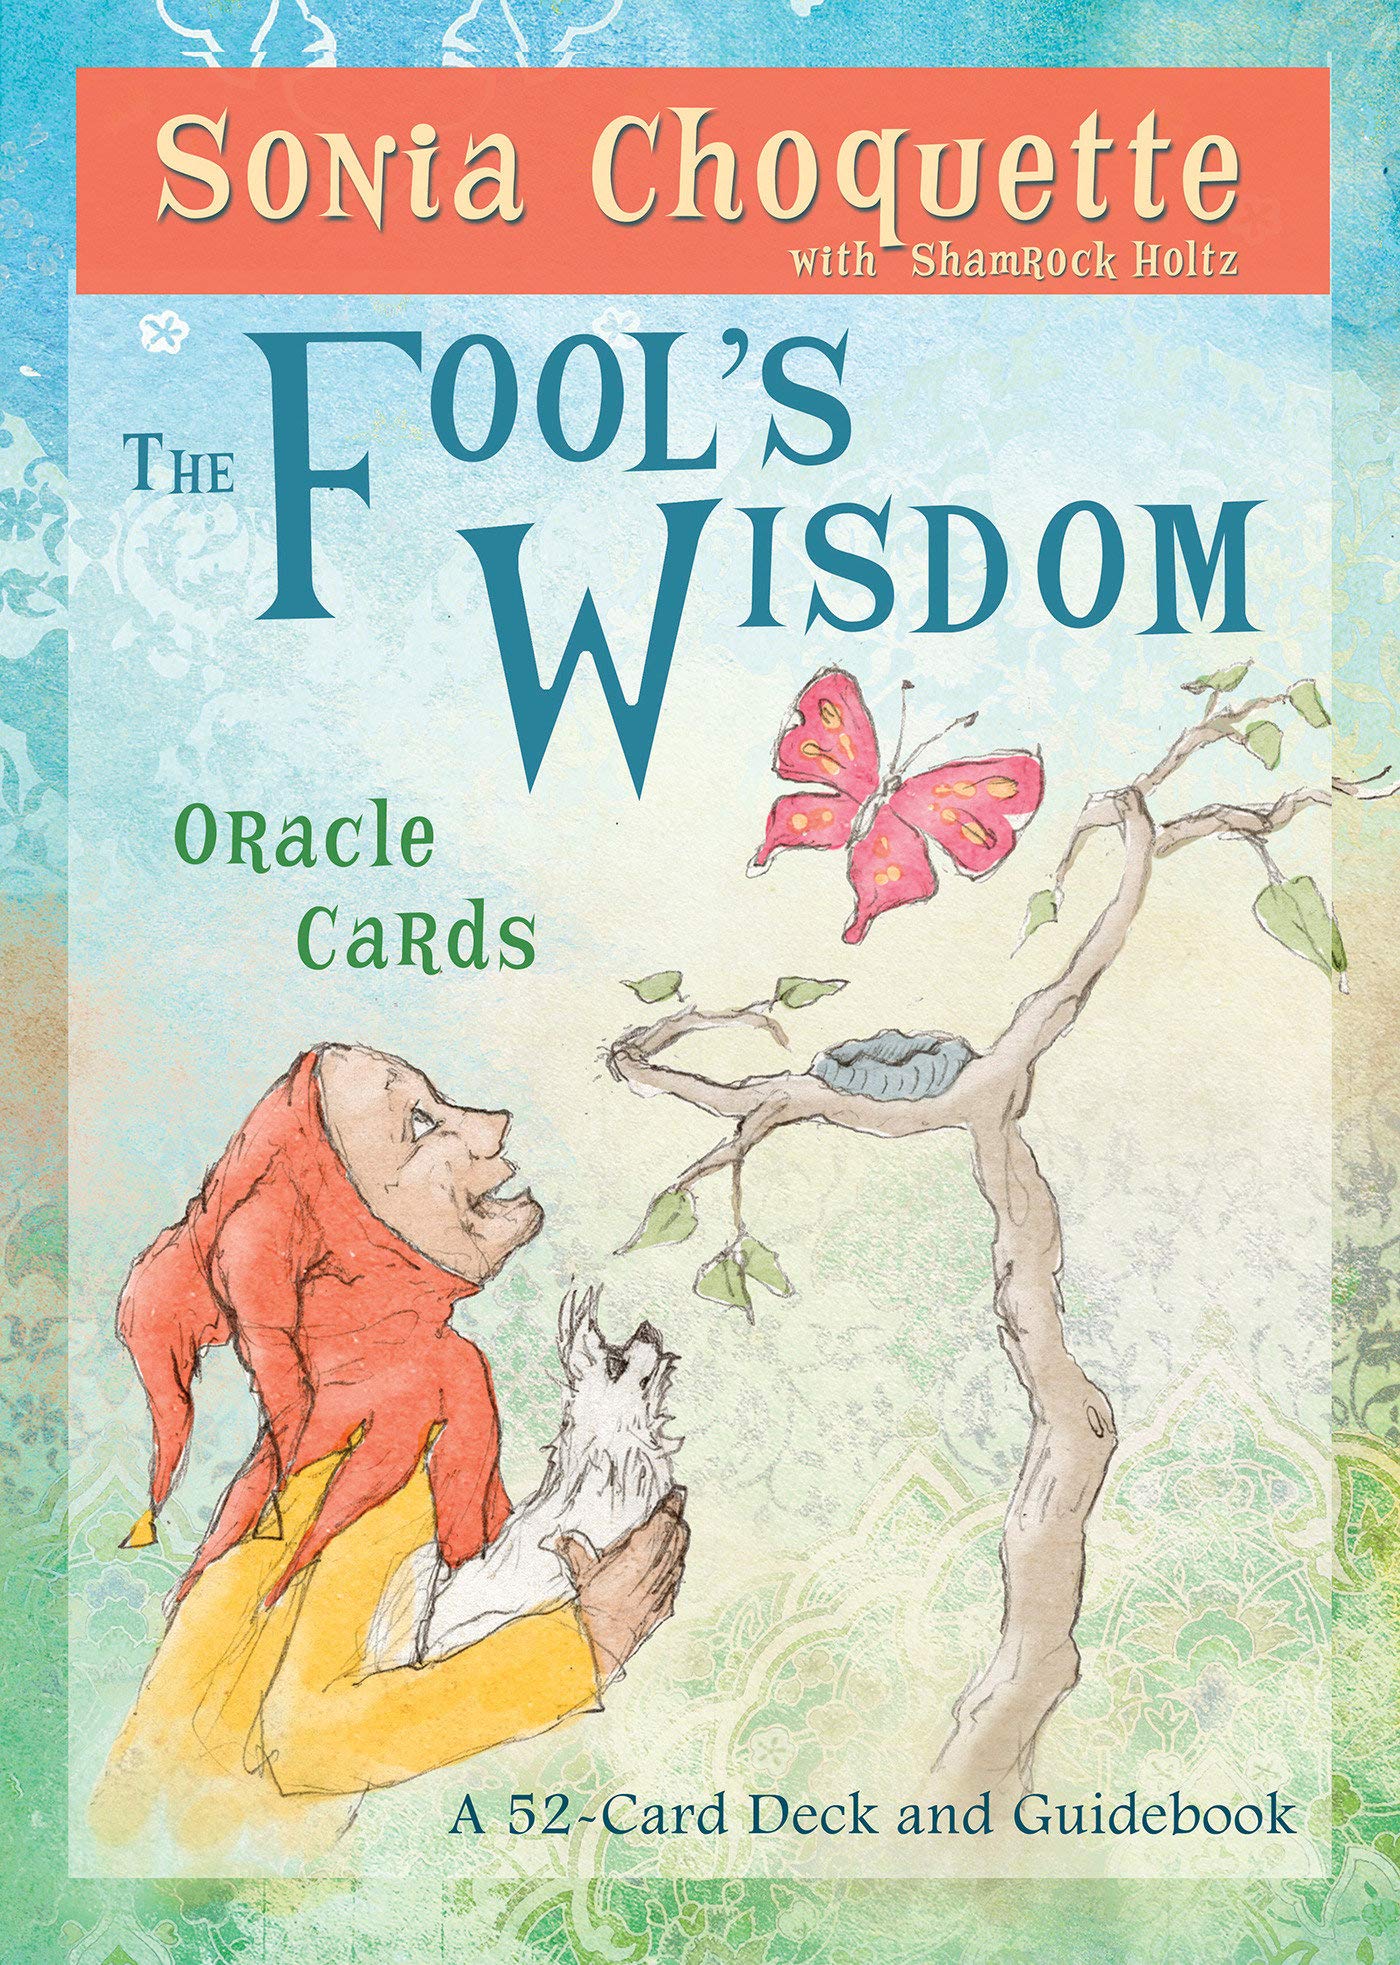 The Fool's Wisdom Oracle Cards - Sonia Choquette